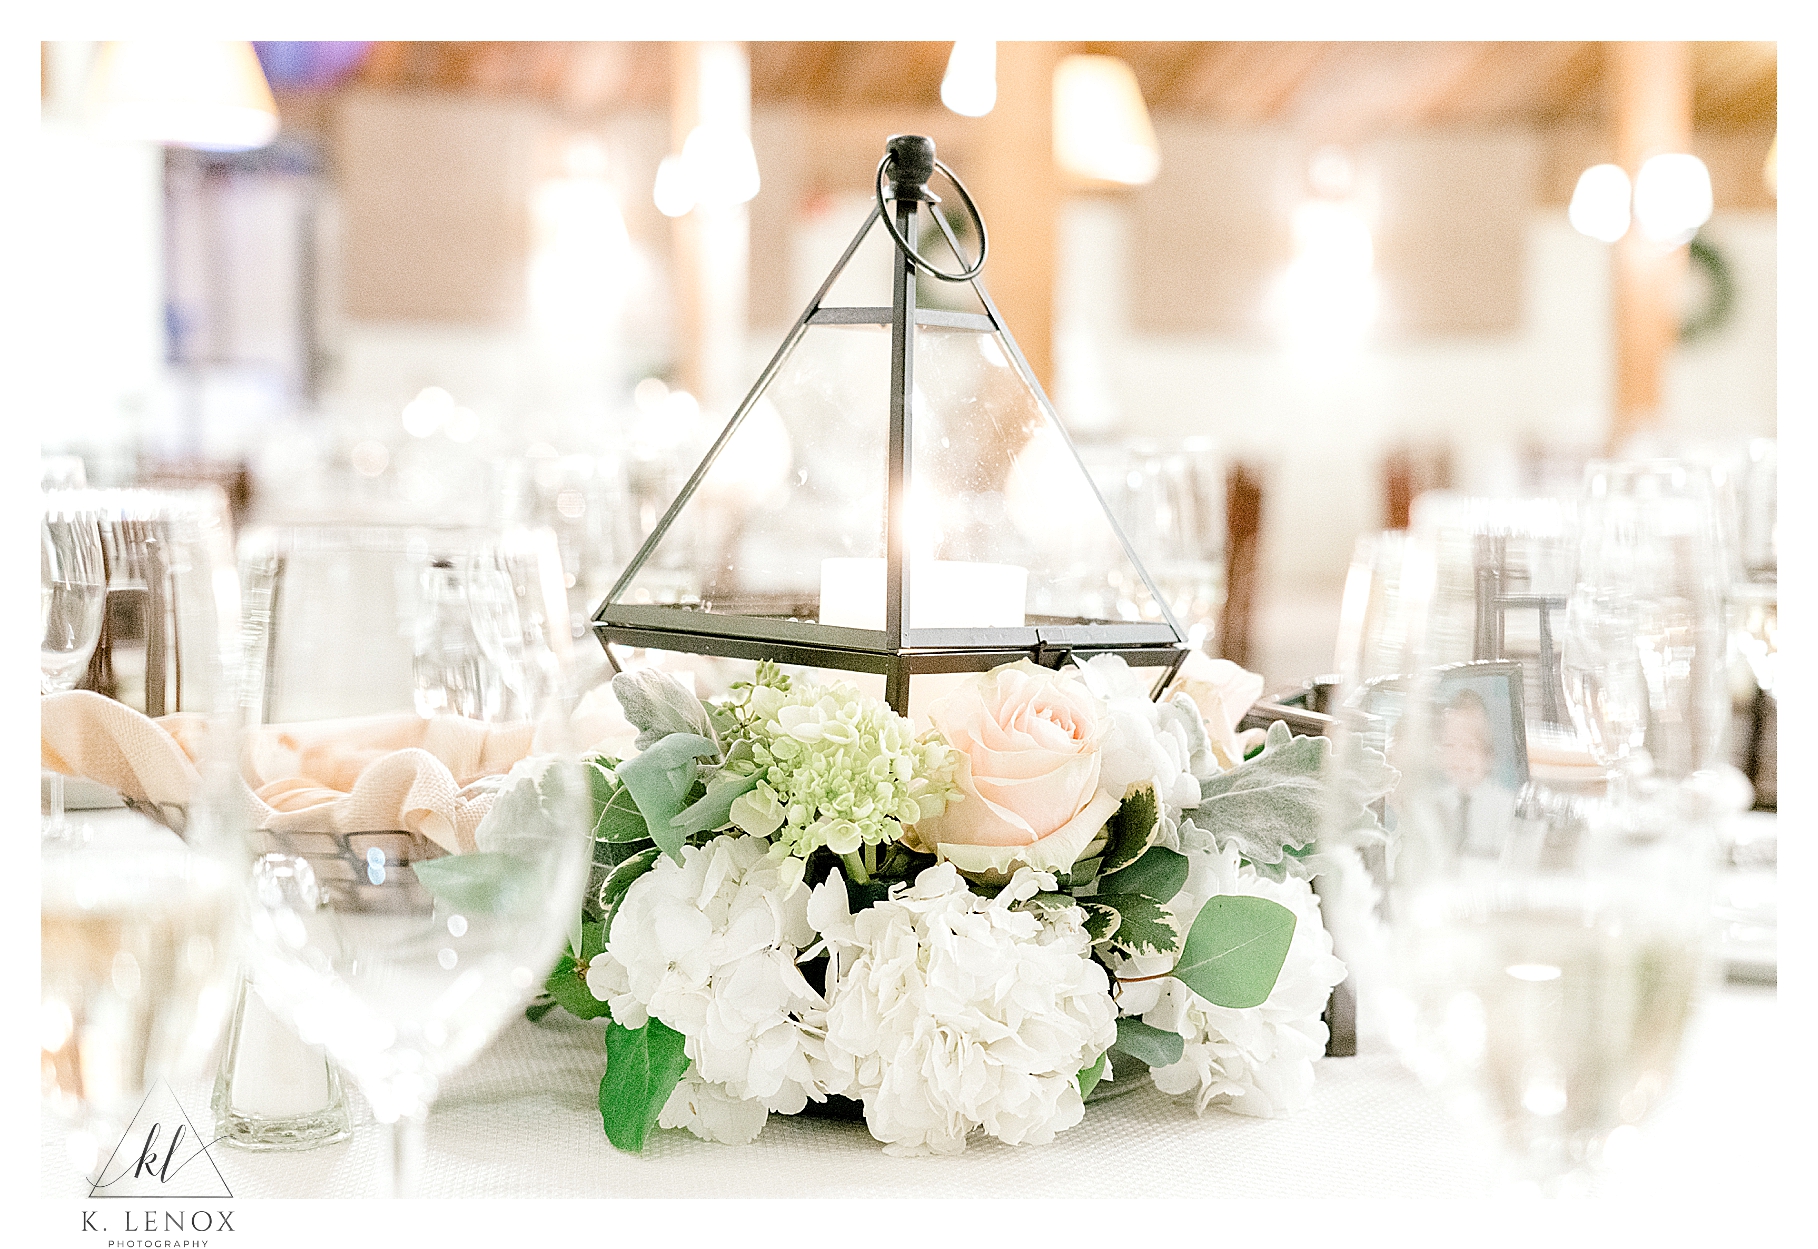 Light and Airy table centerpiece